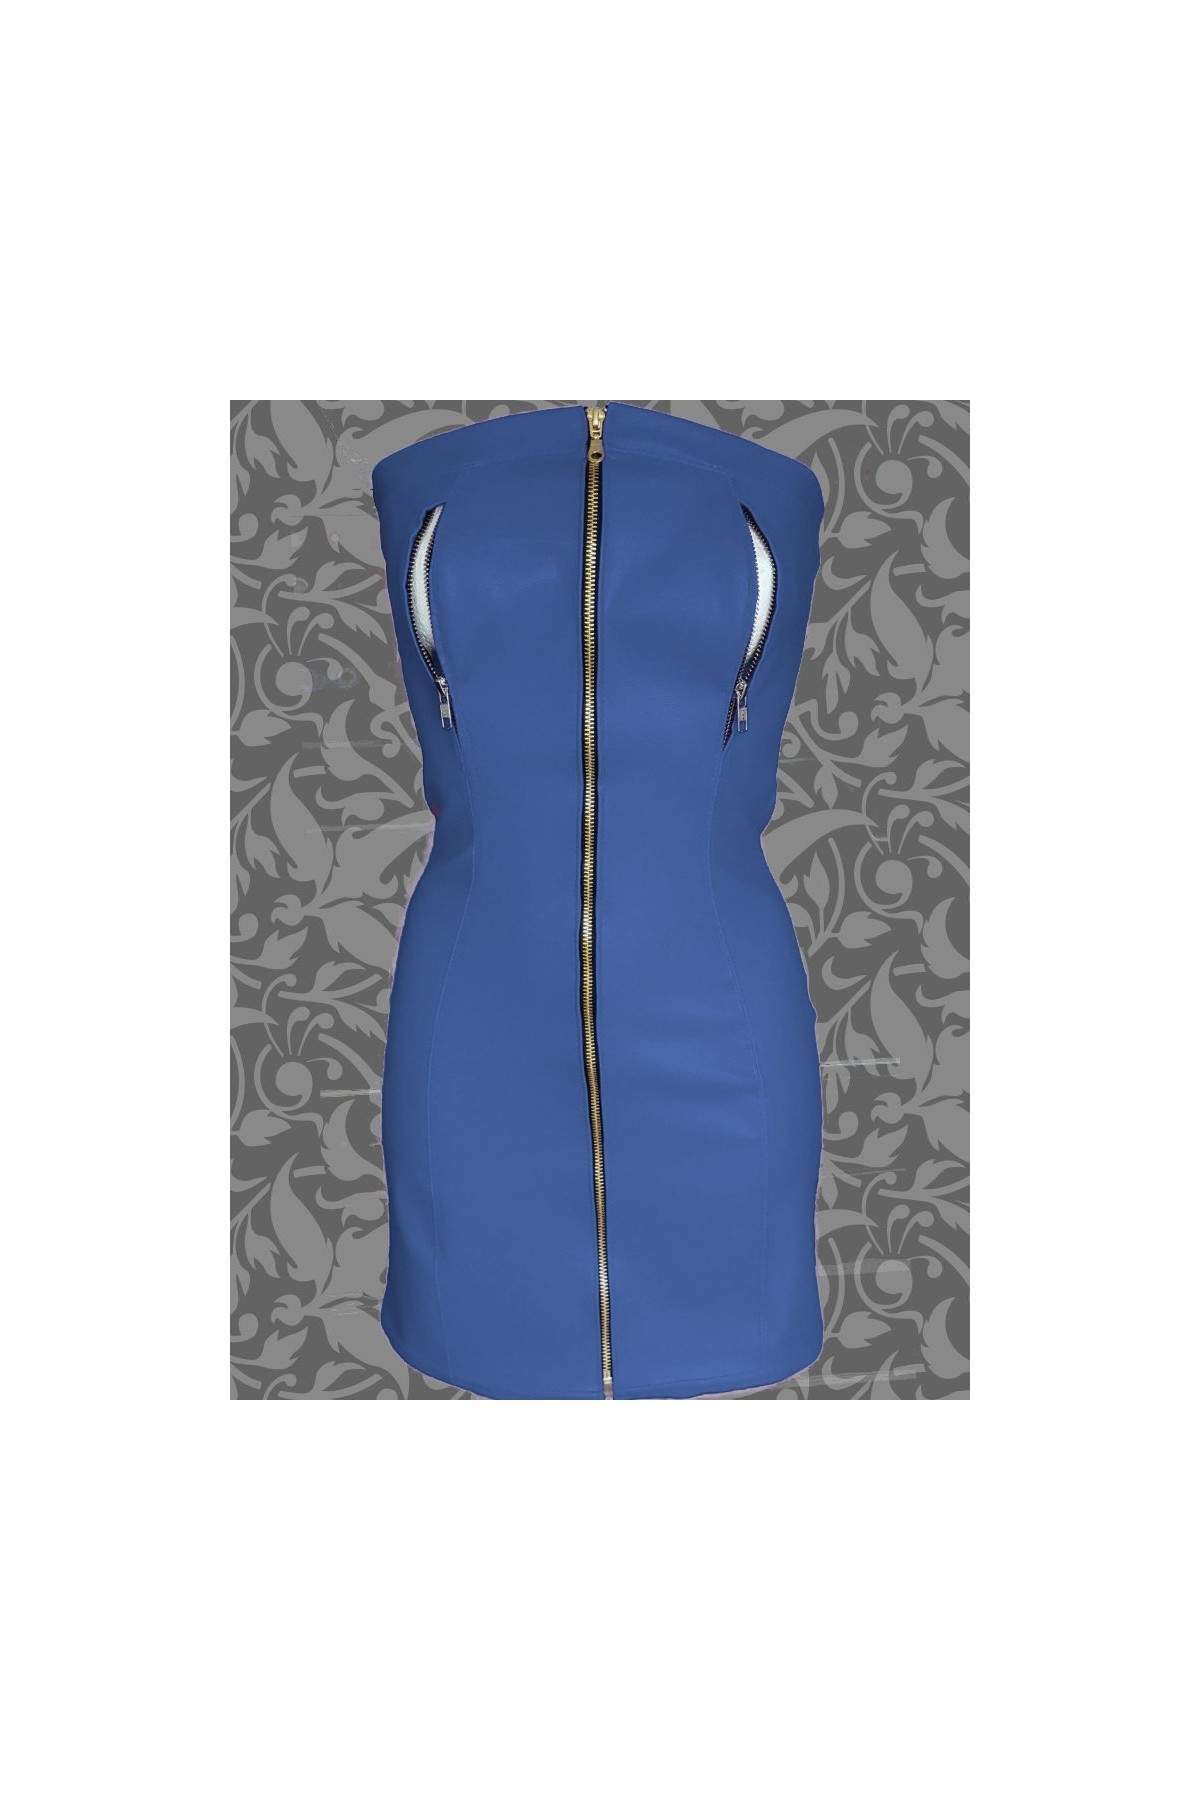 Nipple-free soft leather dress blue with zippers - Deutsche Produktion